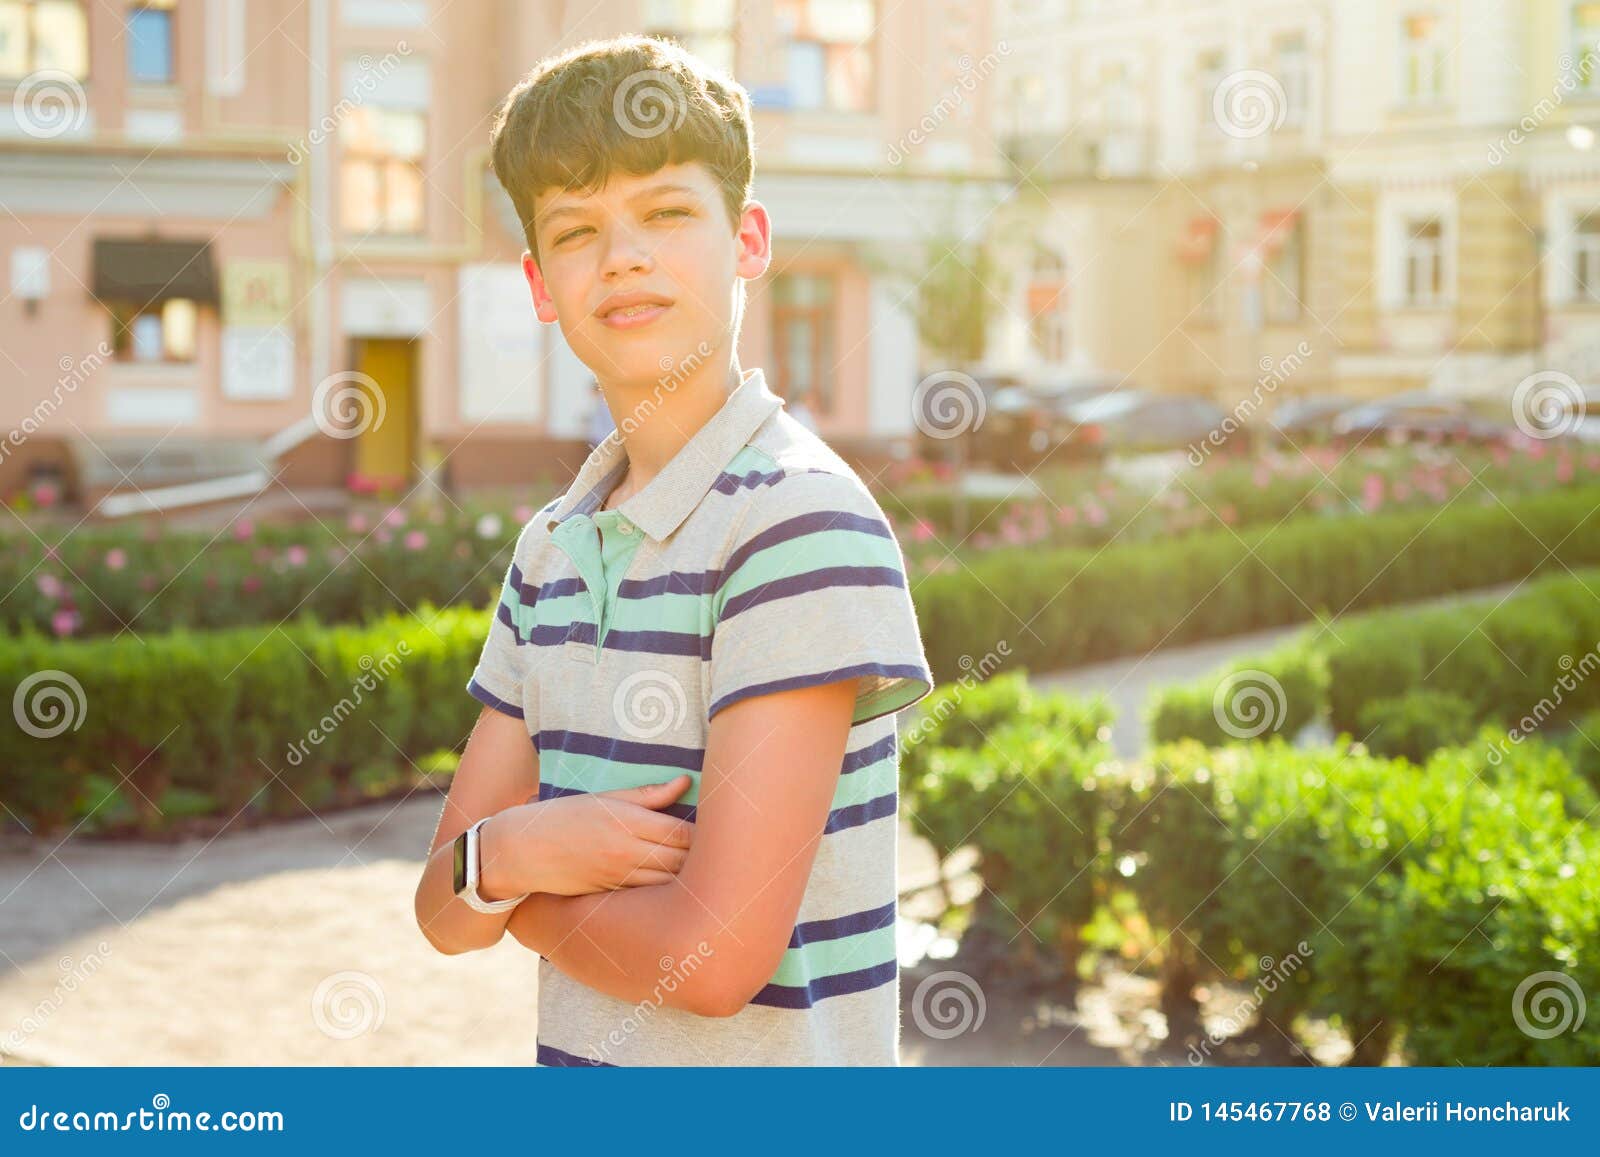 Outdoor Portrait Of Teenager 13, 14 Years Old, Boy With Crossed Arms